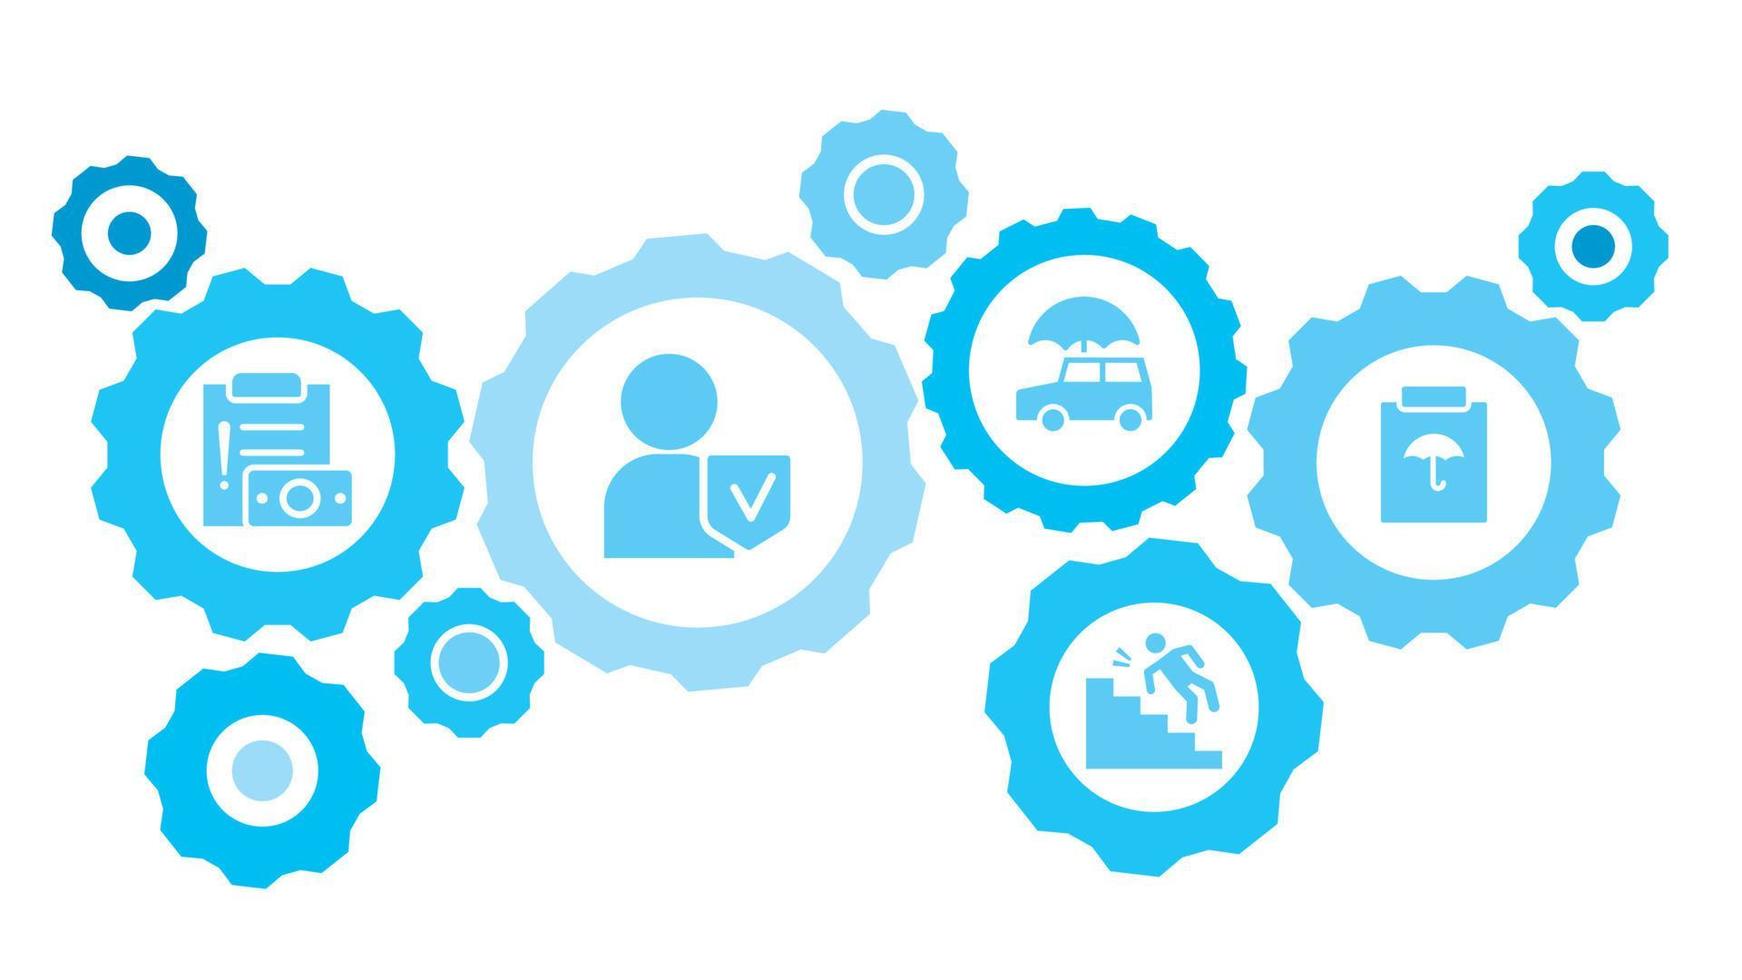 Connected gears and icons for logistic, service, shipping, distribution, transport, market, communicate concepts. Guarantee, insurance, policy gear blue icon set on white background vector